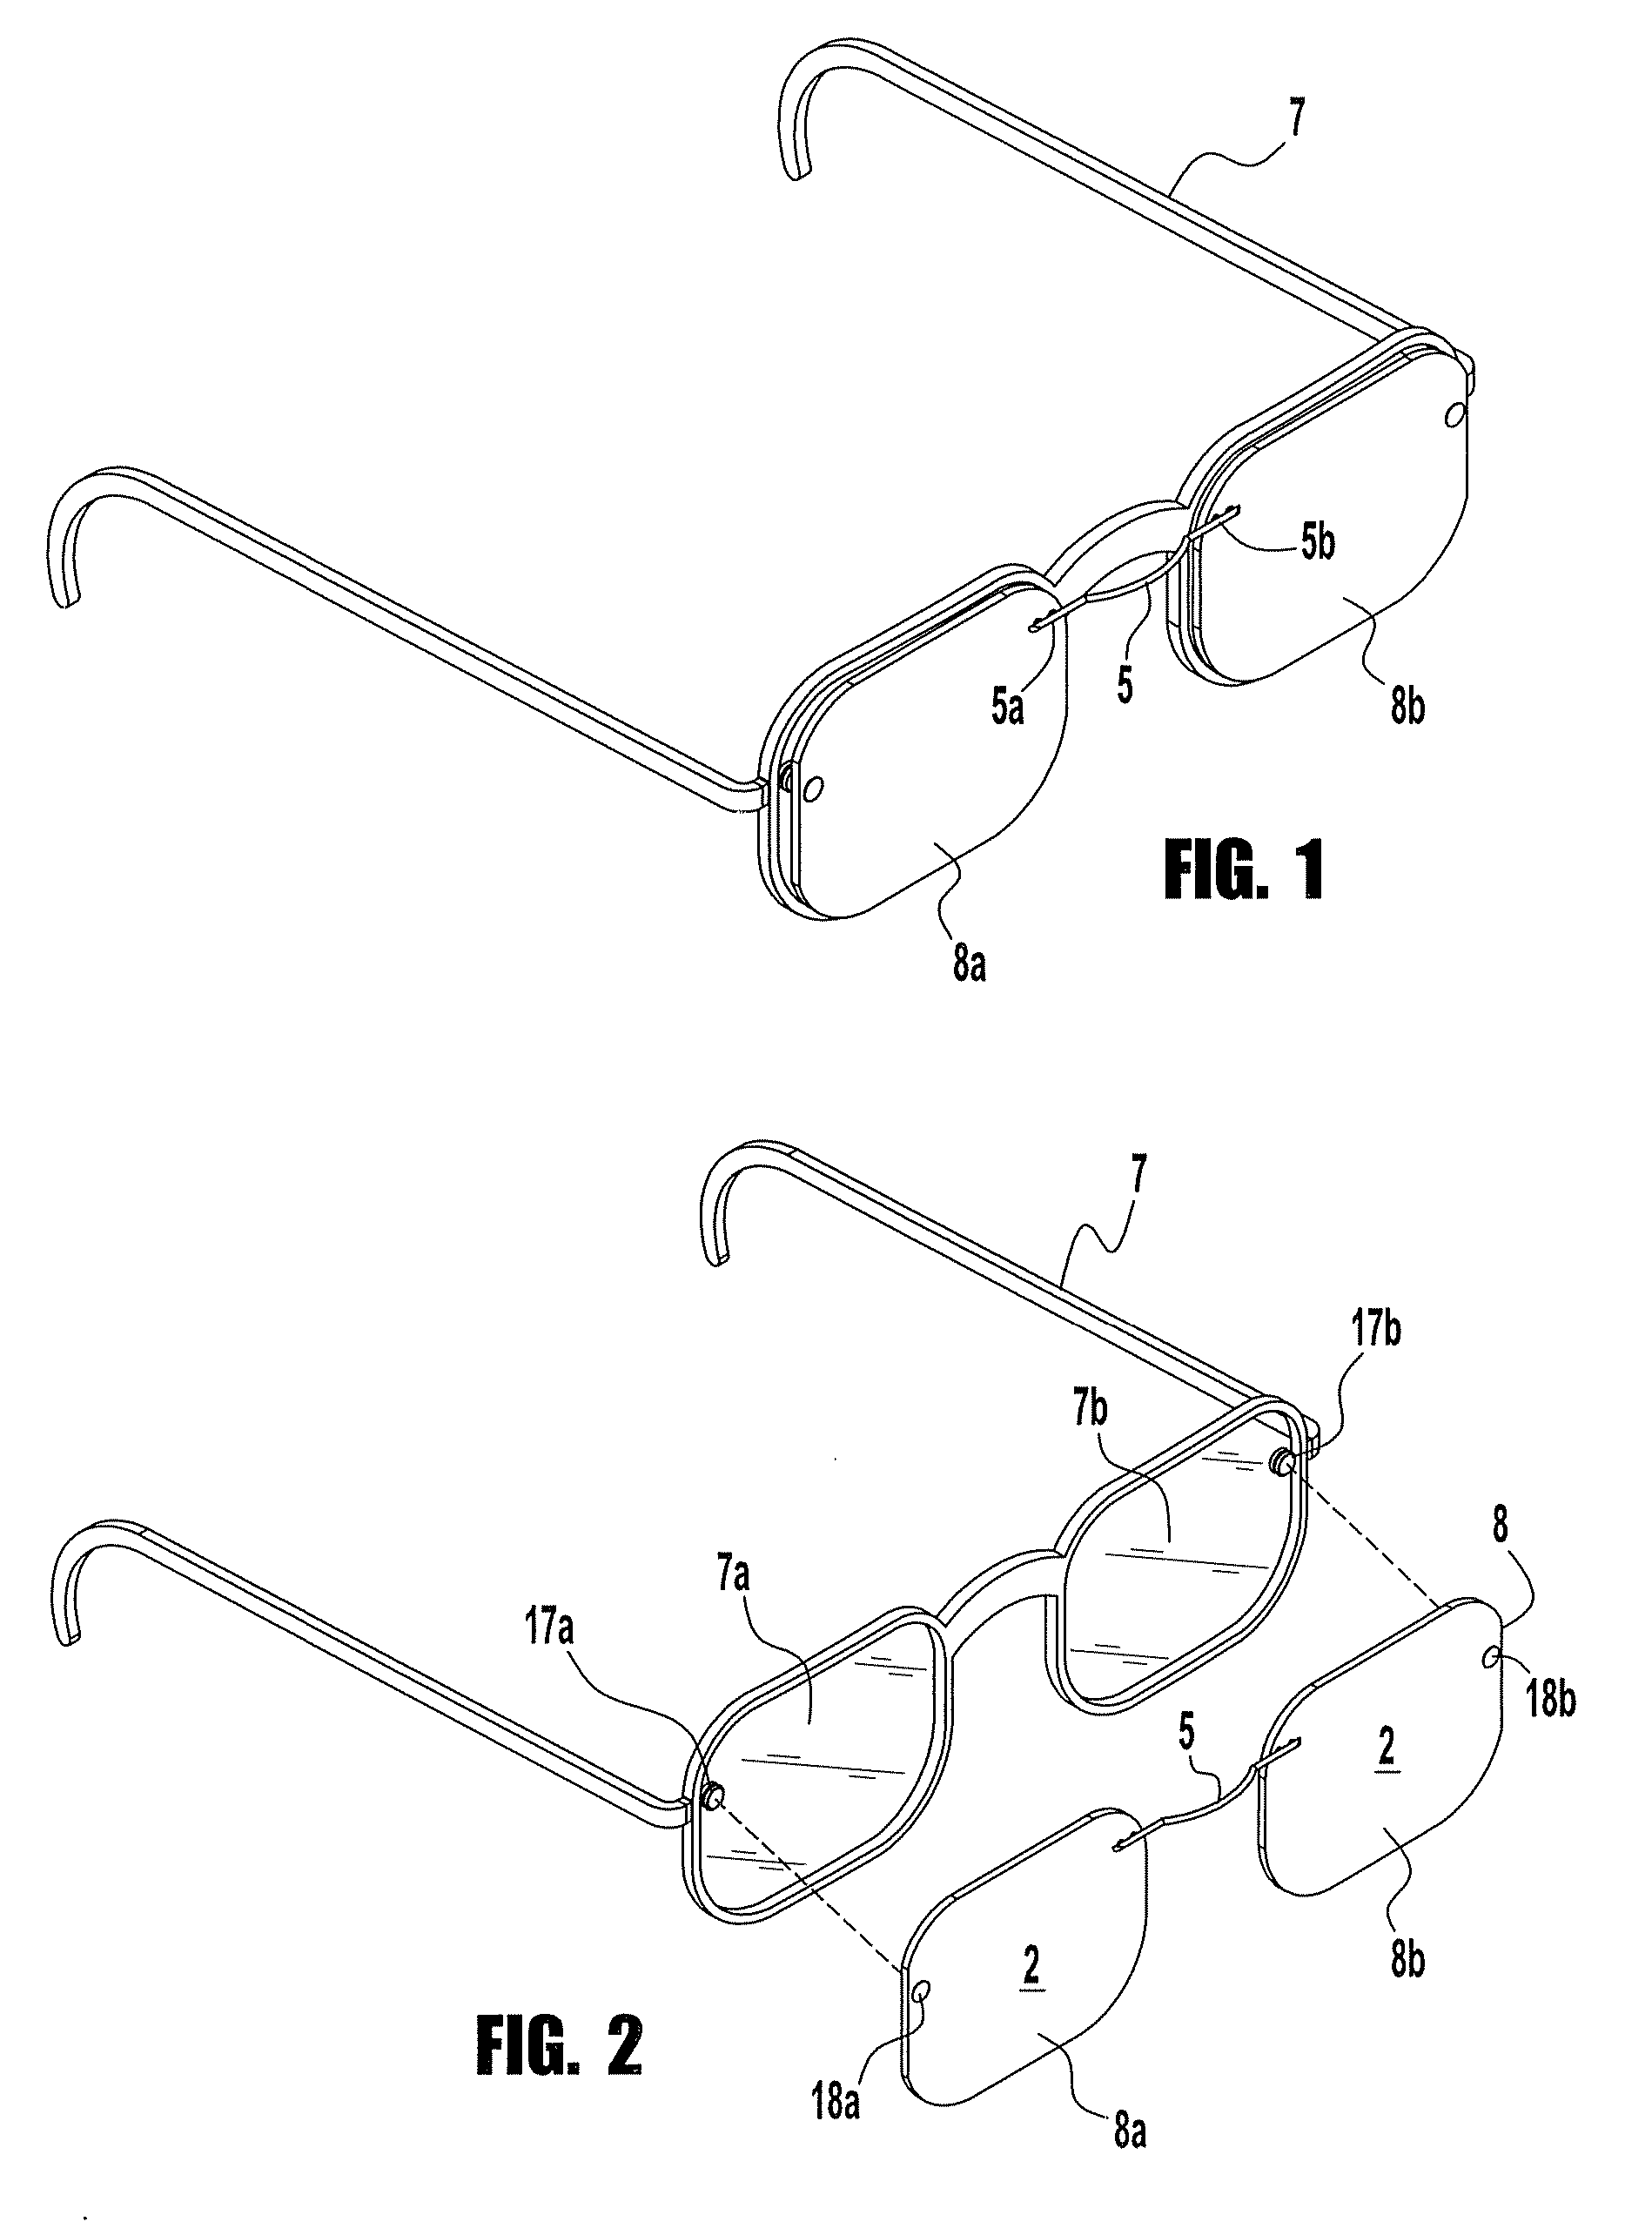 Attachable magnetic eyeglasses and method of making same